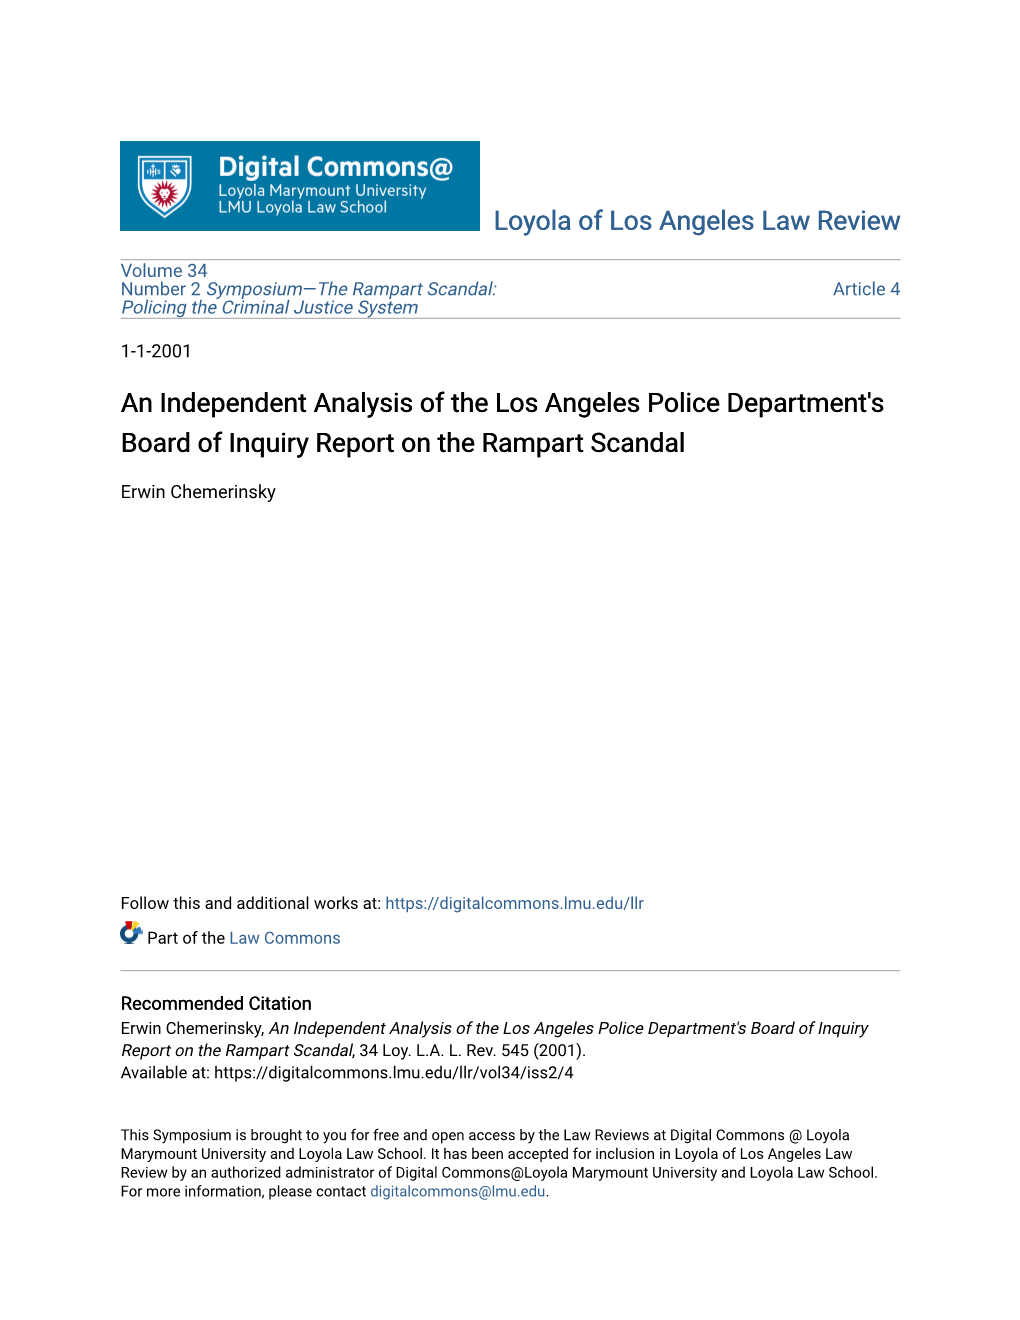 An Independent Analysis of the Los Angeles Police Department's Board of Inquiry Report on the Rampart Scandal